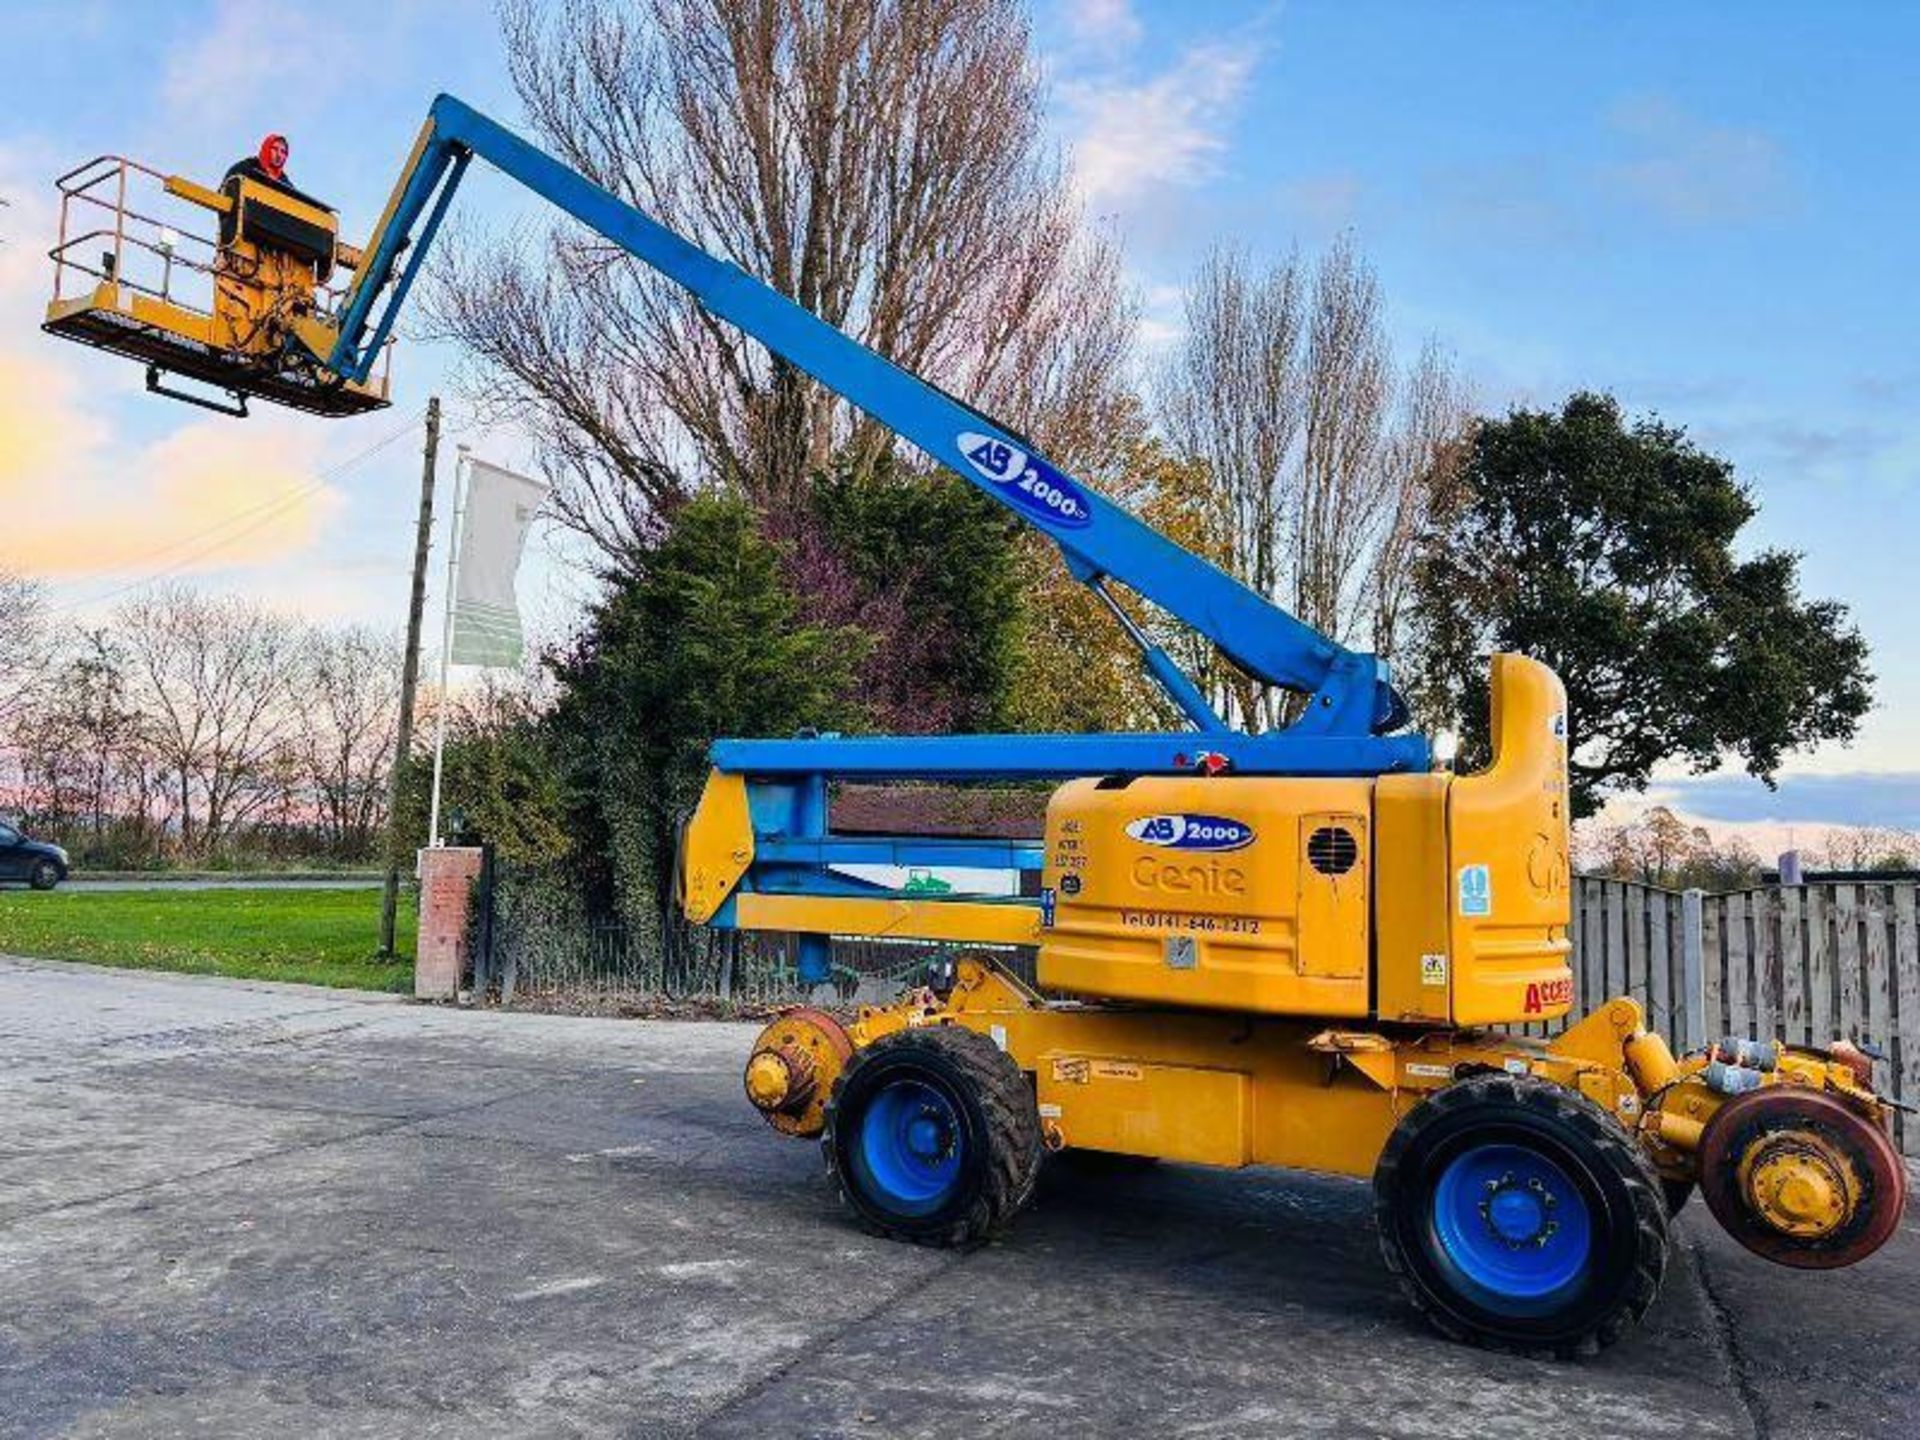 GENIE Z-60/34 4WD ARTICULATED RAIL ROAD BOOM LIFT * 20.3 METER REACH *. - Image 3 of 15